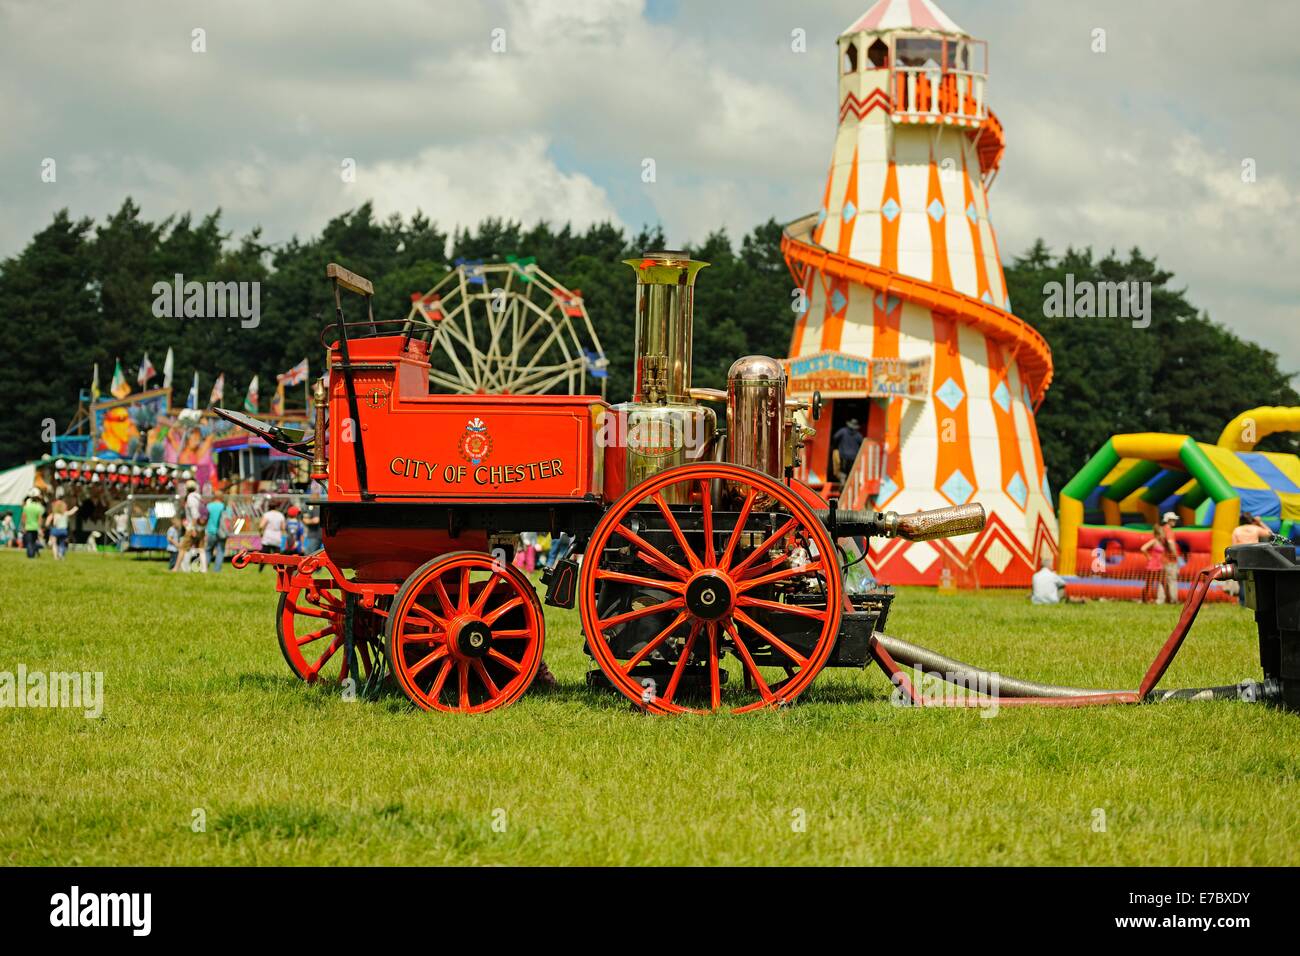 A Victorian horse-drawn fire engine stands at a fair ground Stock Photo